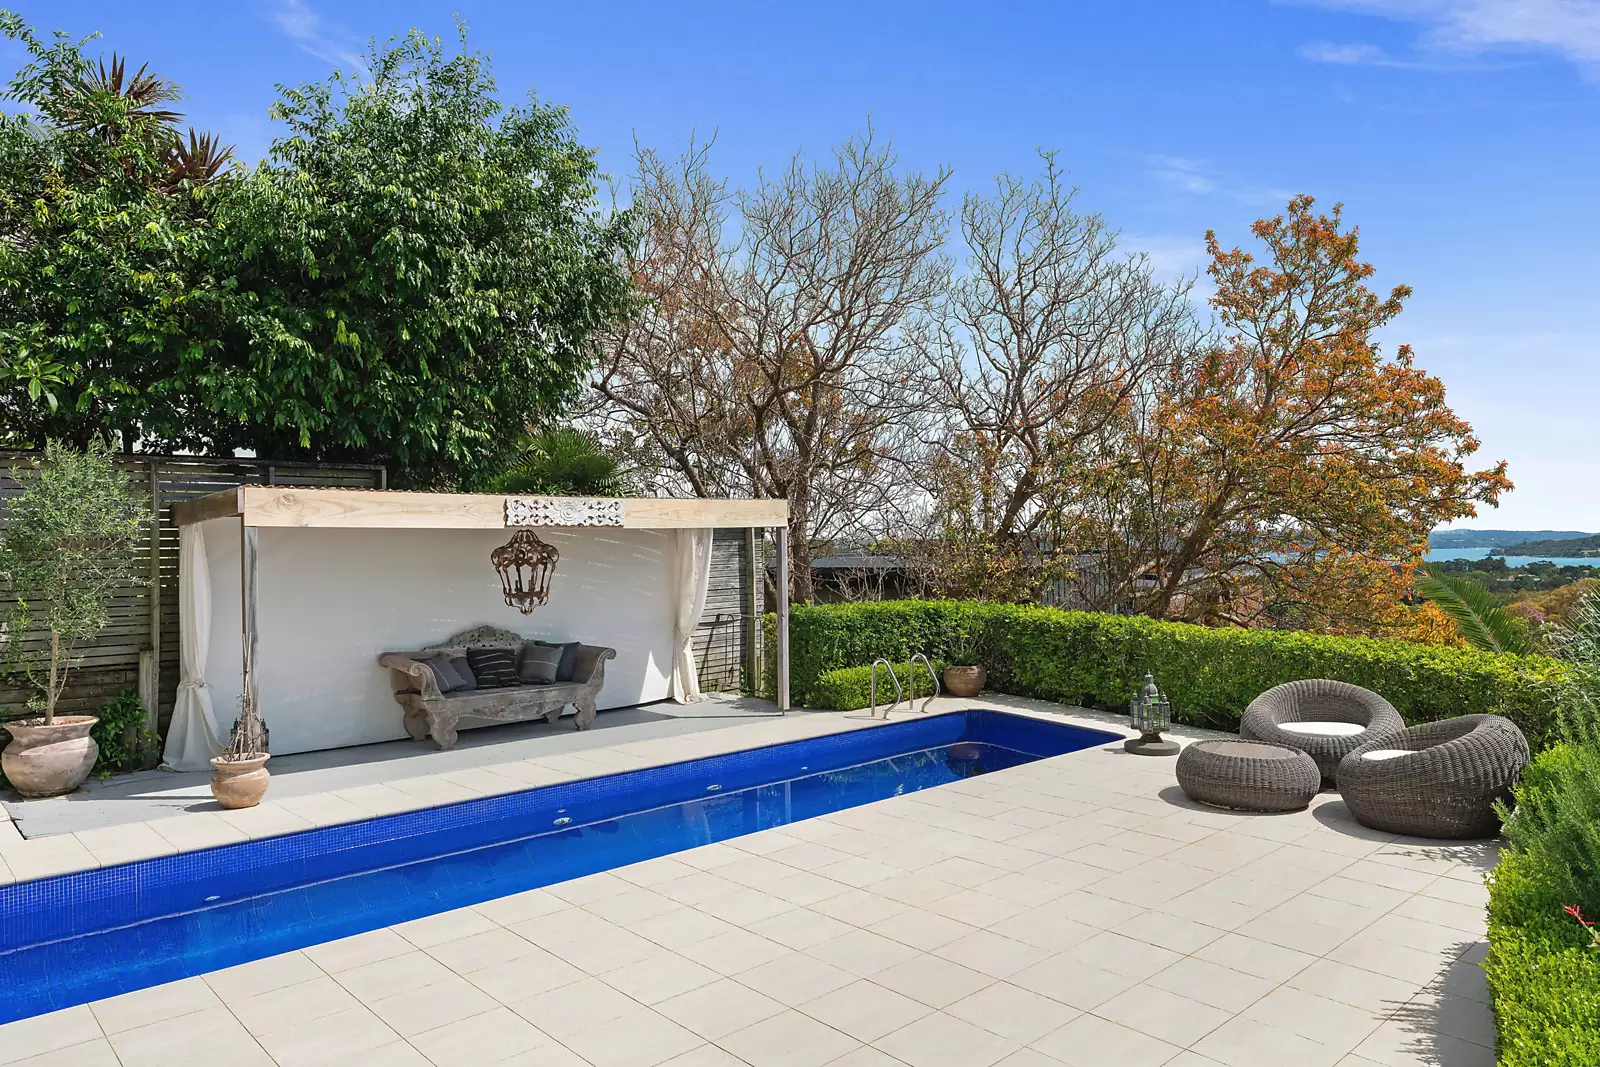 Photo #12: Residence 1/15 Benelong Crescent, Bellevue Hill - For Sale by Sydney Sotheby's International Realty